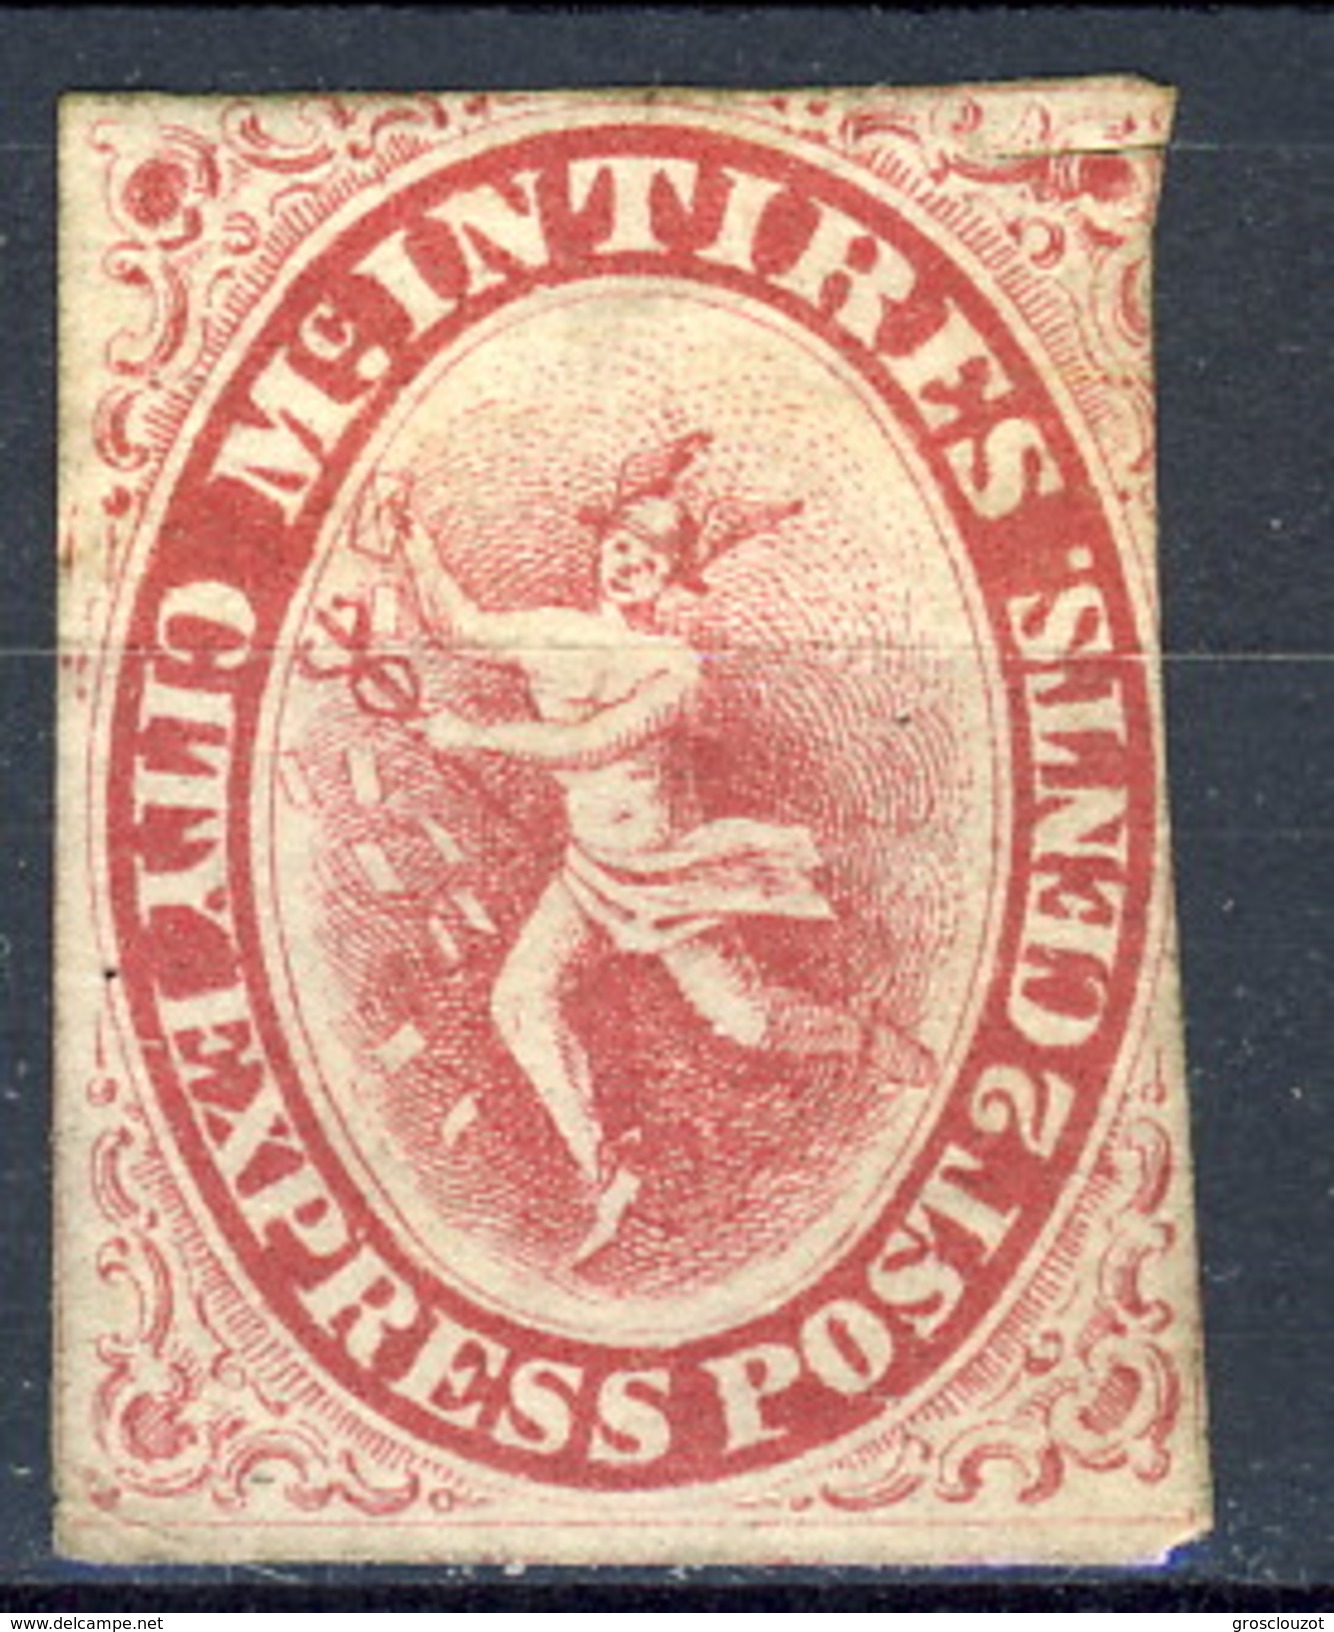 US Local, 1859 Mc. Intire City Express Post 2 Cents, New York - 1845-47 Postmaster Provisionals